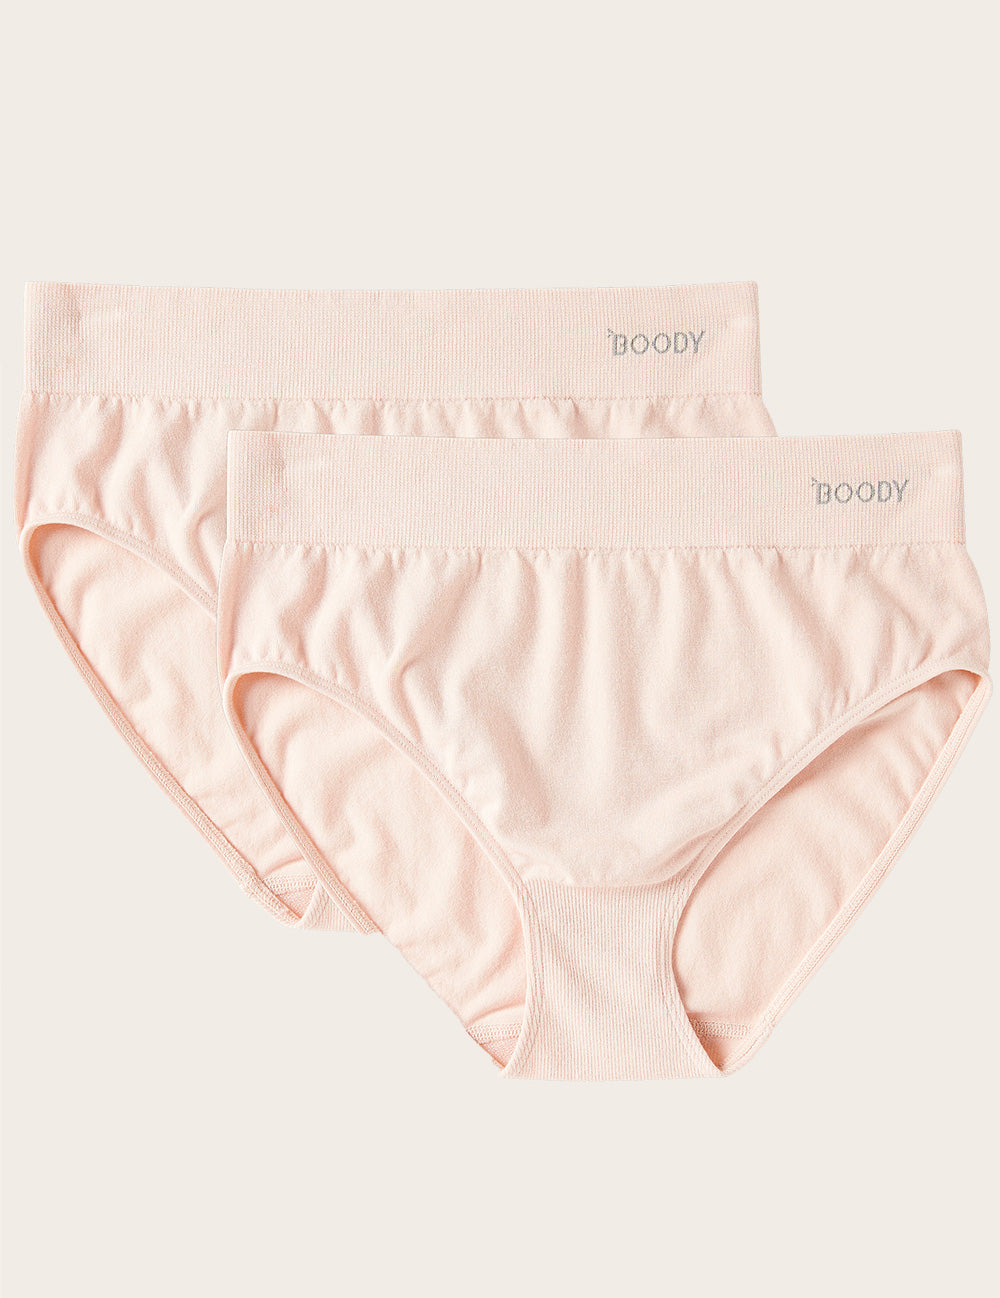 Boody Bamboo 2-pack of Full Brief Women's Underwear in Nude 0